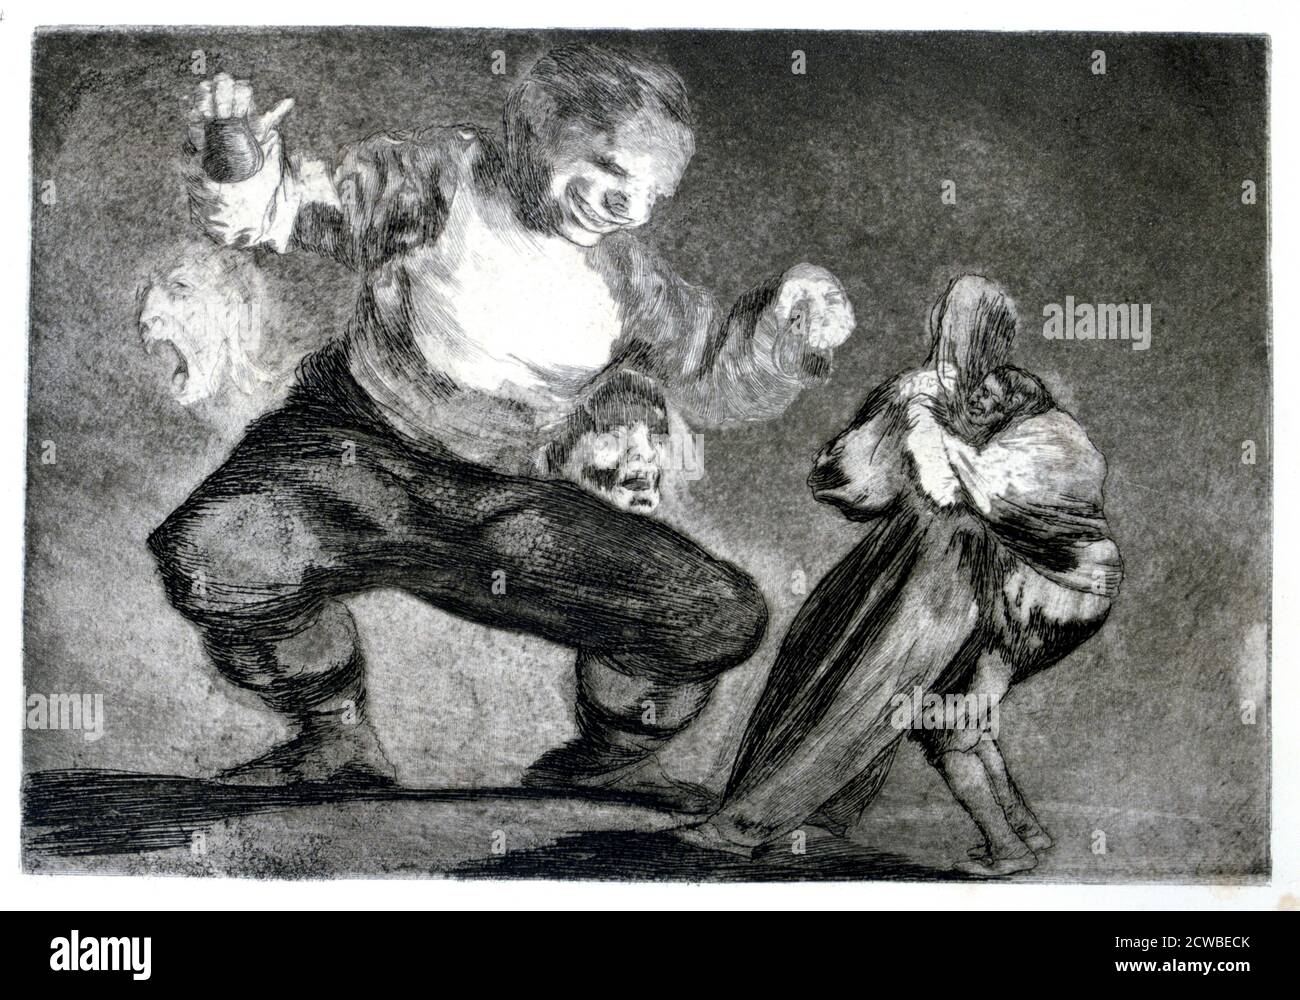 Simpleton', 1819-1823 Artist: Francisco Goya. Plate 4 of 'Proverbs', published in 1864. 'Proverbs' is an album of twenty-two prints which is the last major series of prints by Francisco Goya. Stock Photo